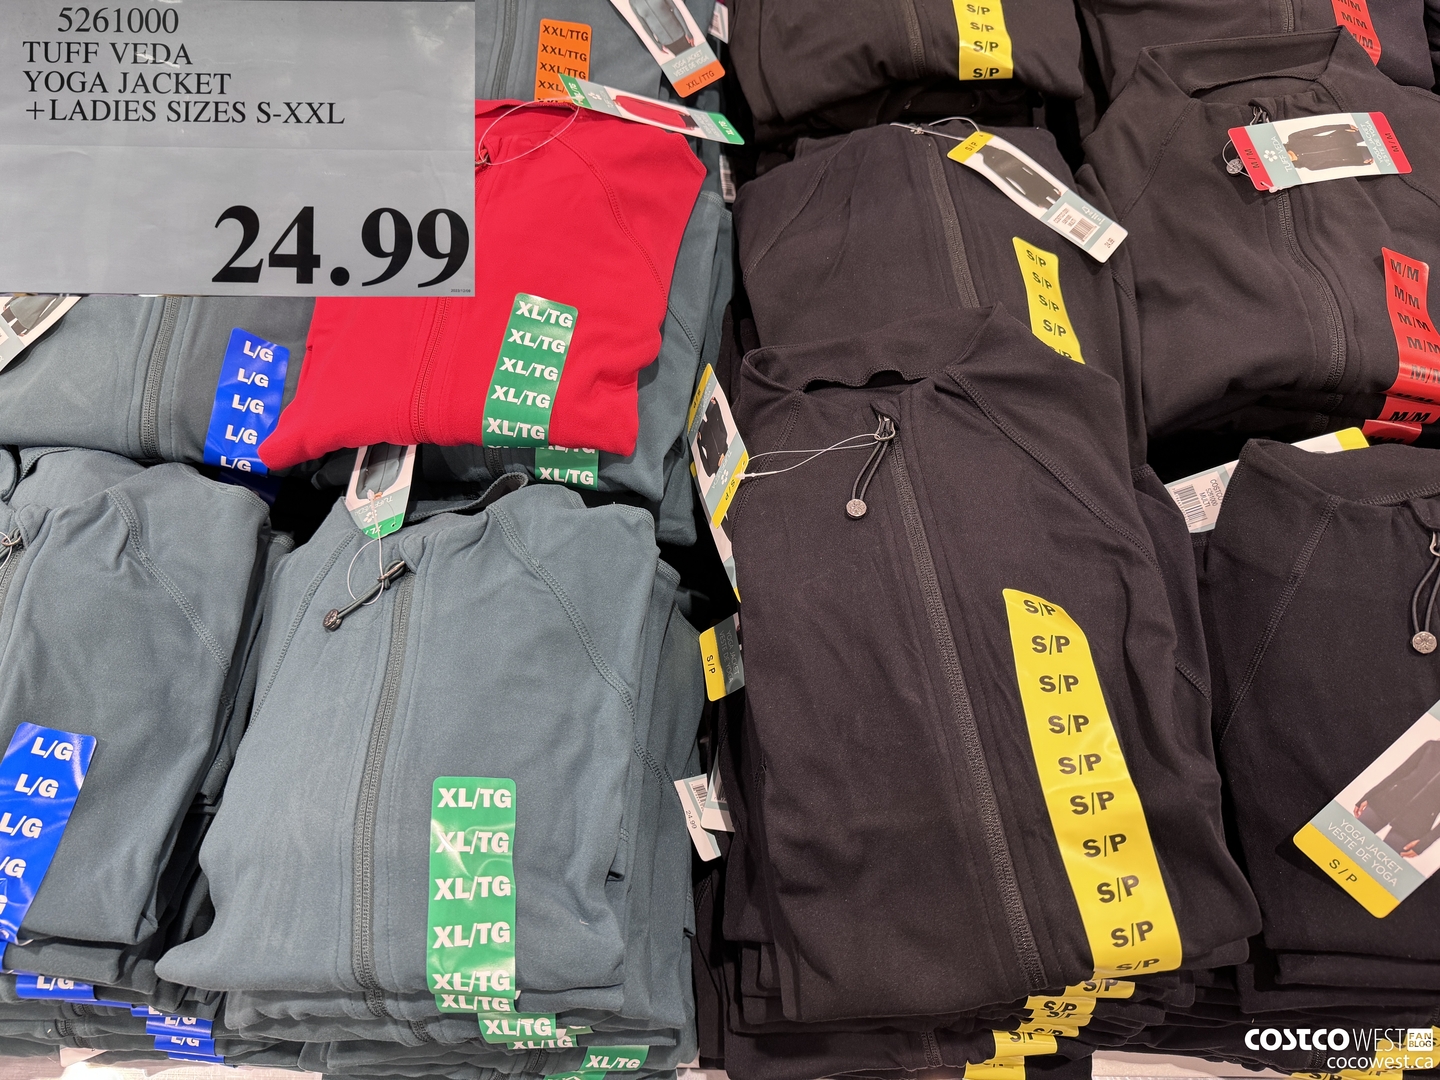 Costco Winter 2023 Clothing Superpost – Swimsuits & Spring Clothing -  Costco West Fan Blog